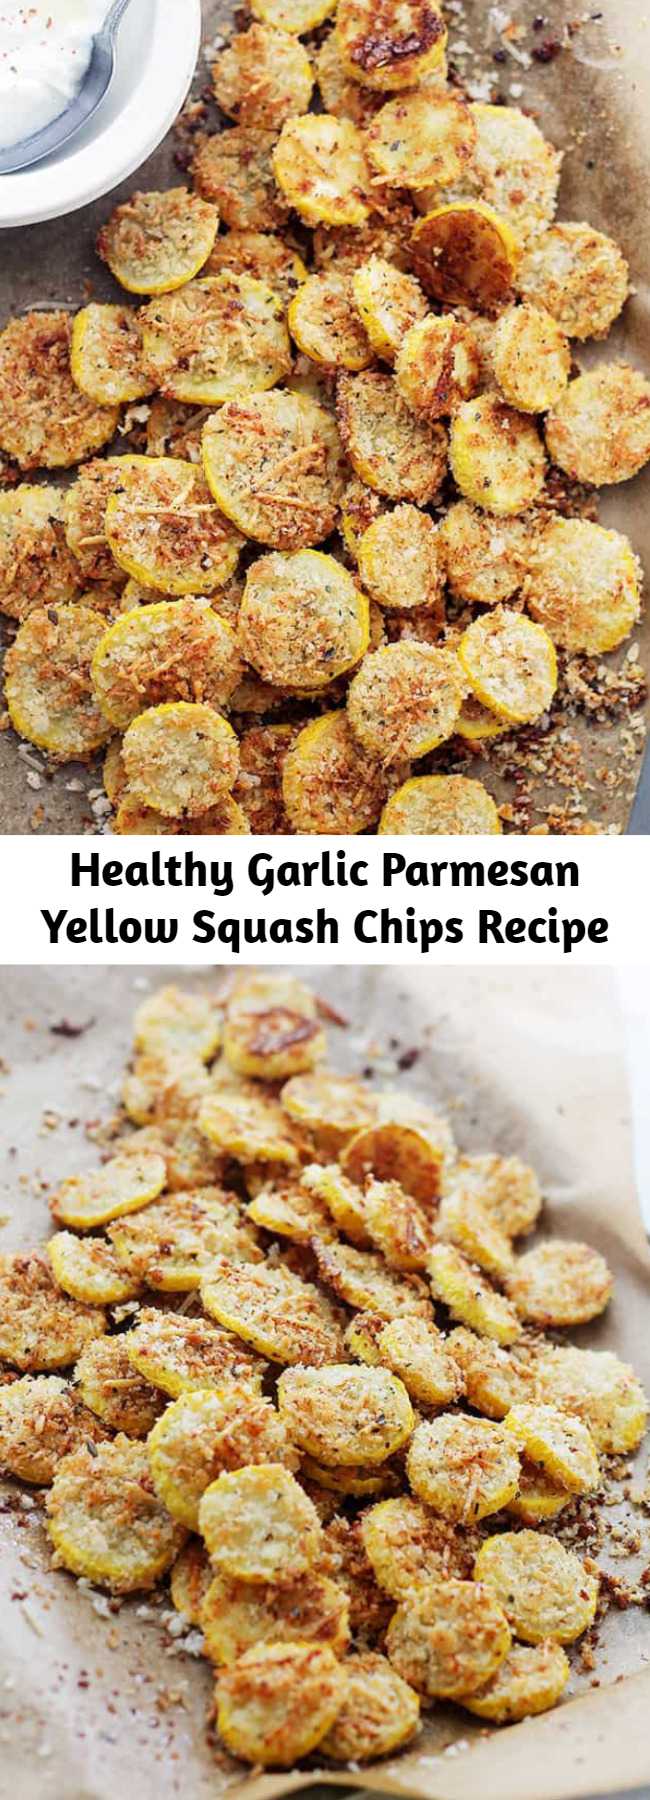 Healthy Garlic Parmesan Yellow Squash Chips Recipe - A healthy snack or appetizer that is incredibly flavorful, crispy, and absolutely delicious! These are BEYOND amazing!